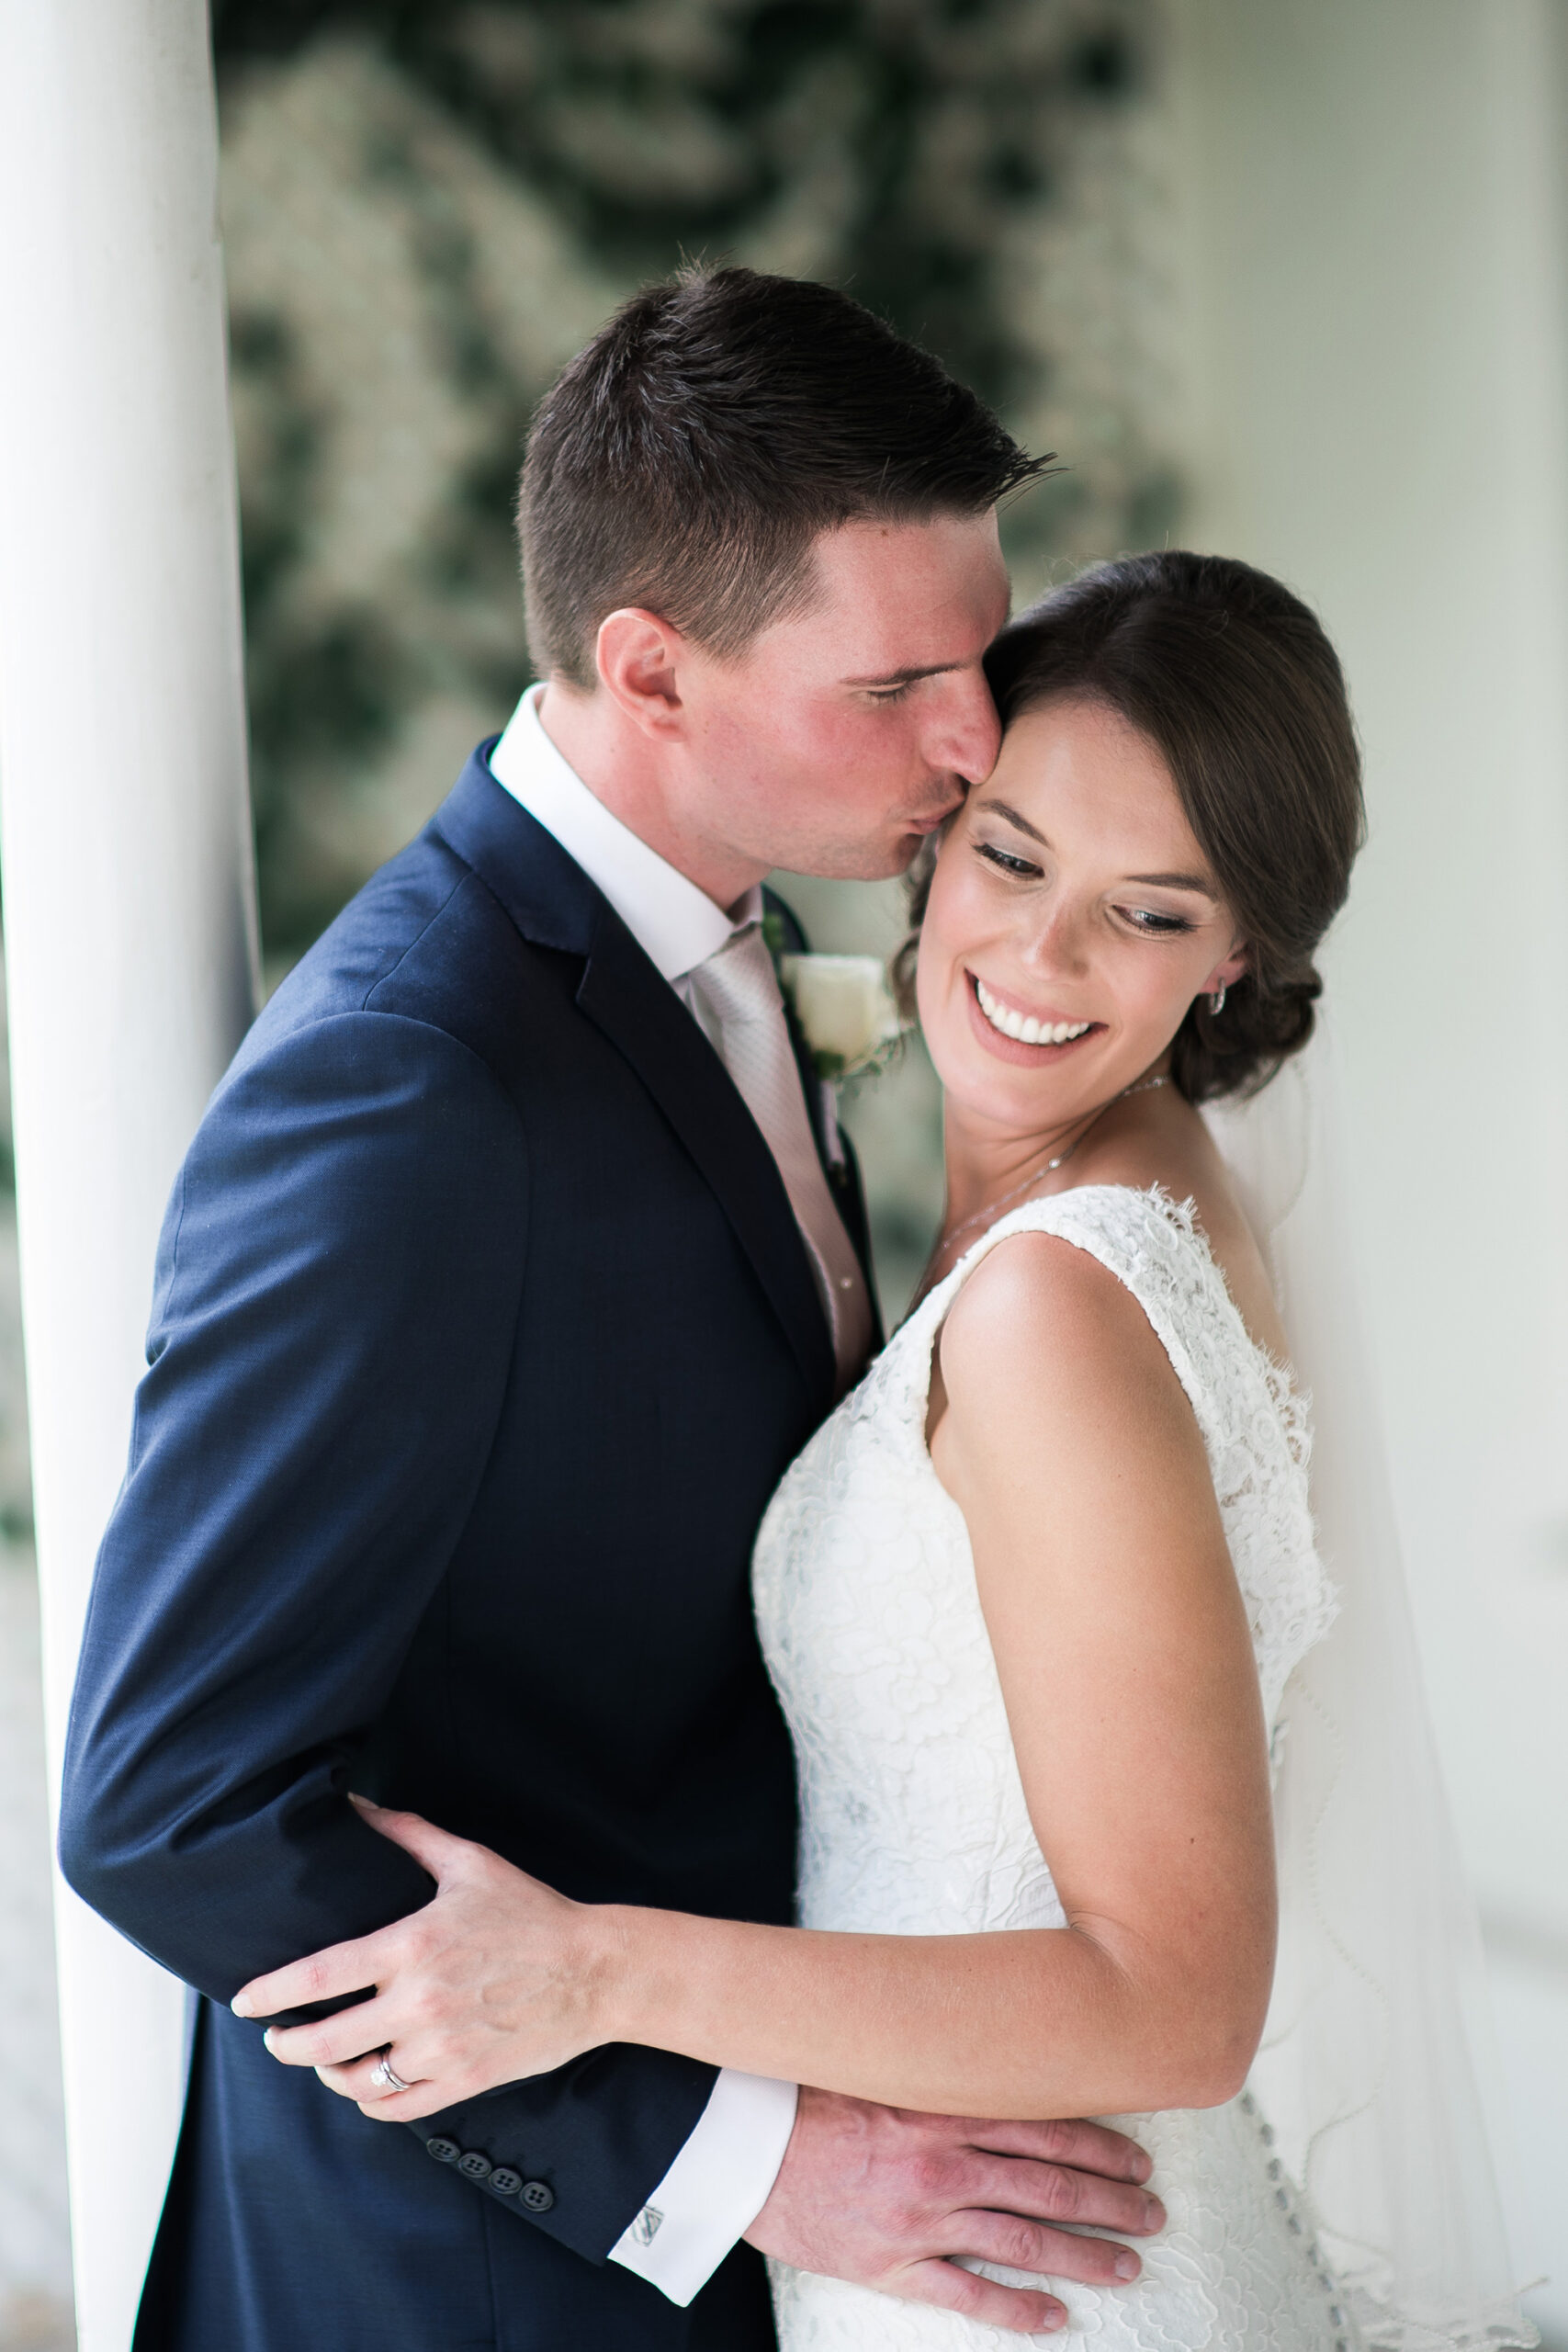 Kirsten_Chris_Classic-Cocktail-Wedding_Passion8-Photography_SBS_025